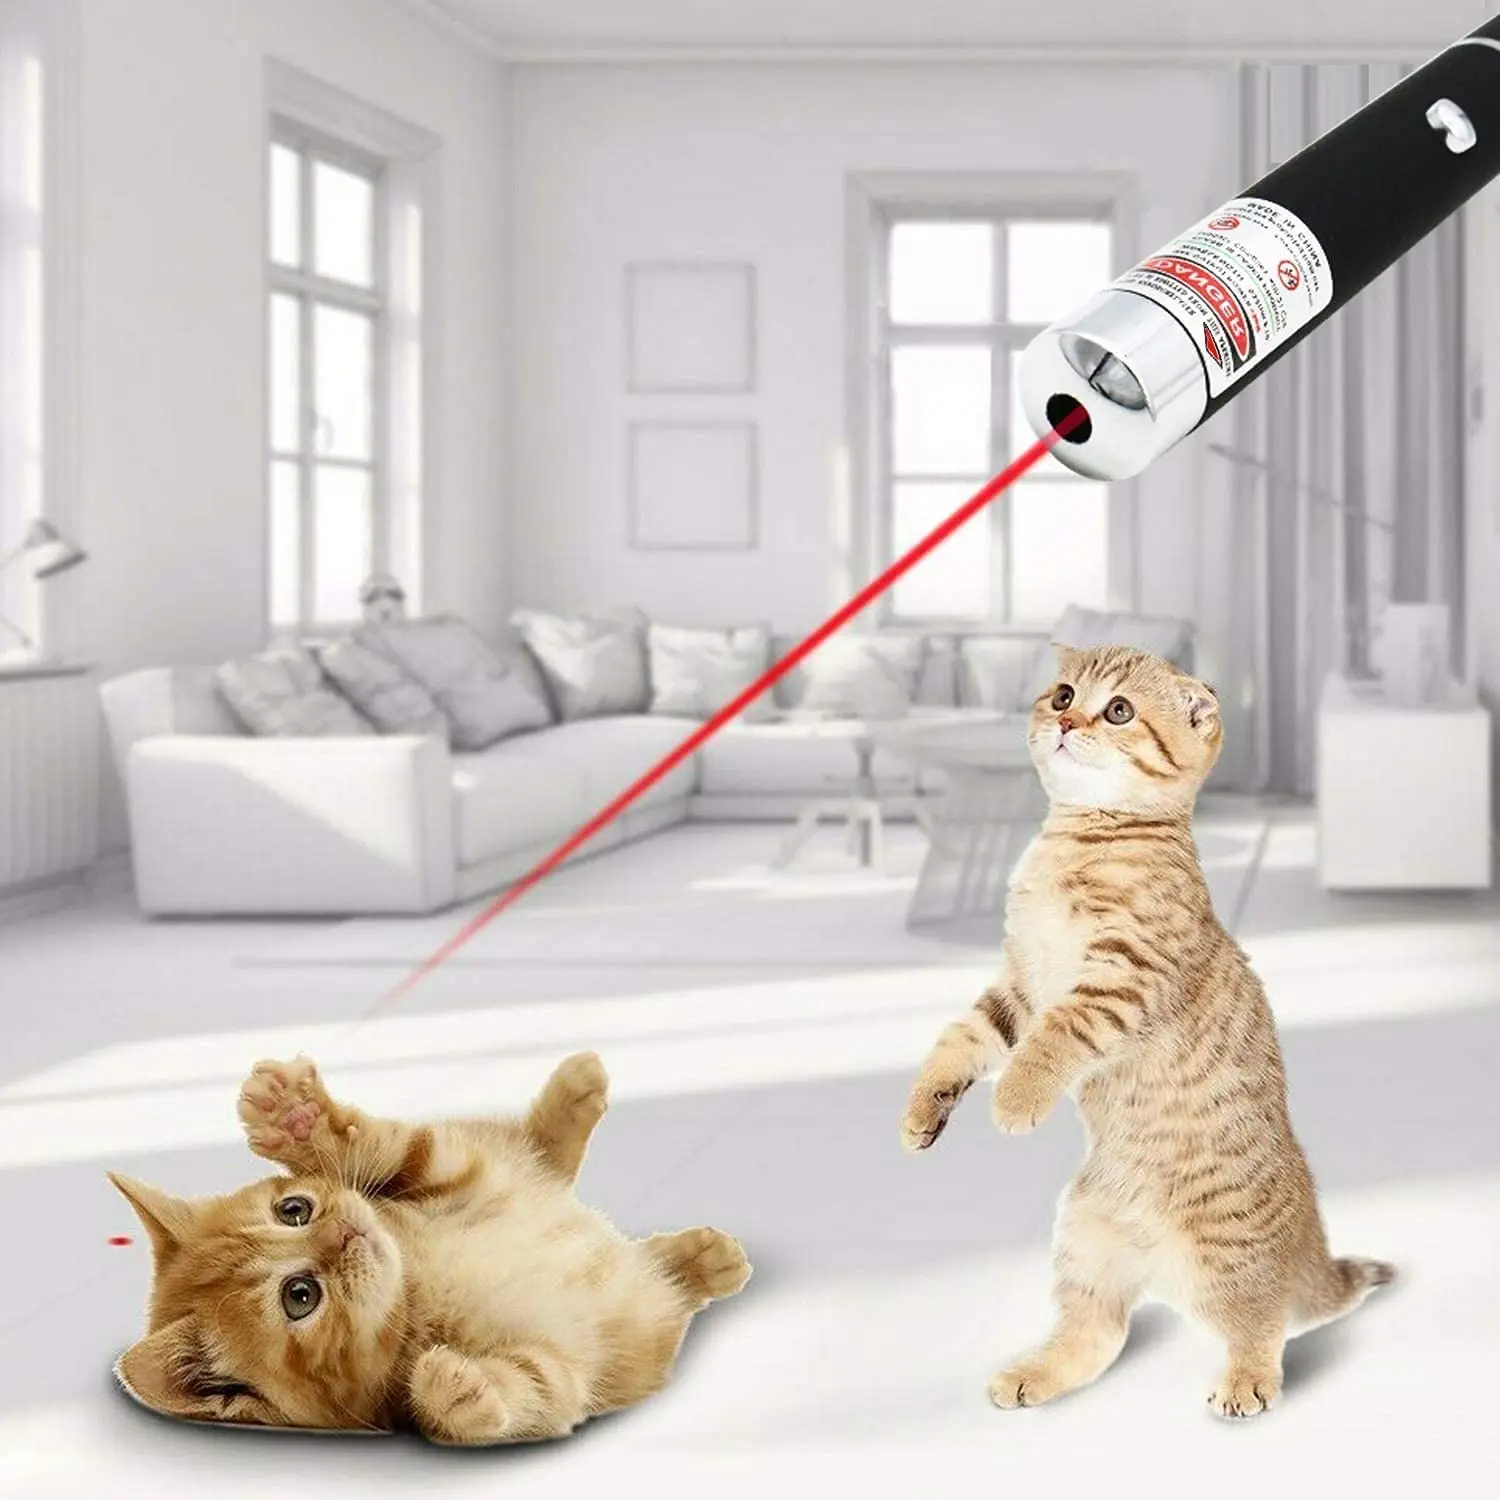 3Pack Laser Pointer 5MW Powerful Laser Pen For Cats Dogs Pet Interactive Toys Presentation Remotes for Indoor Classroom Teaching enlarge